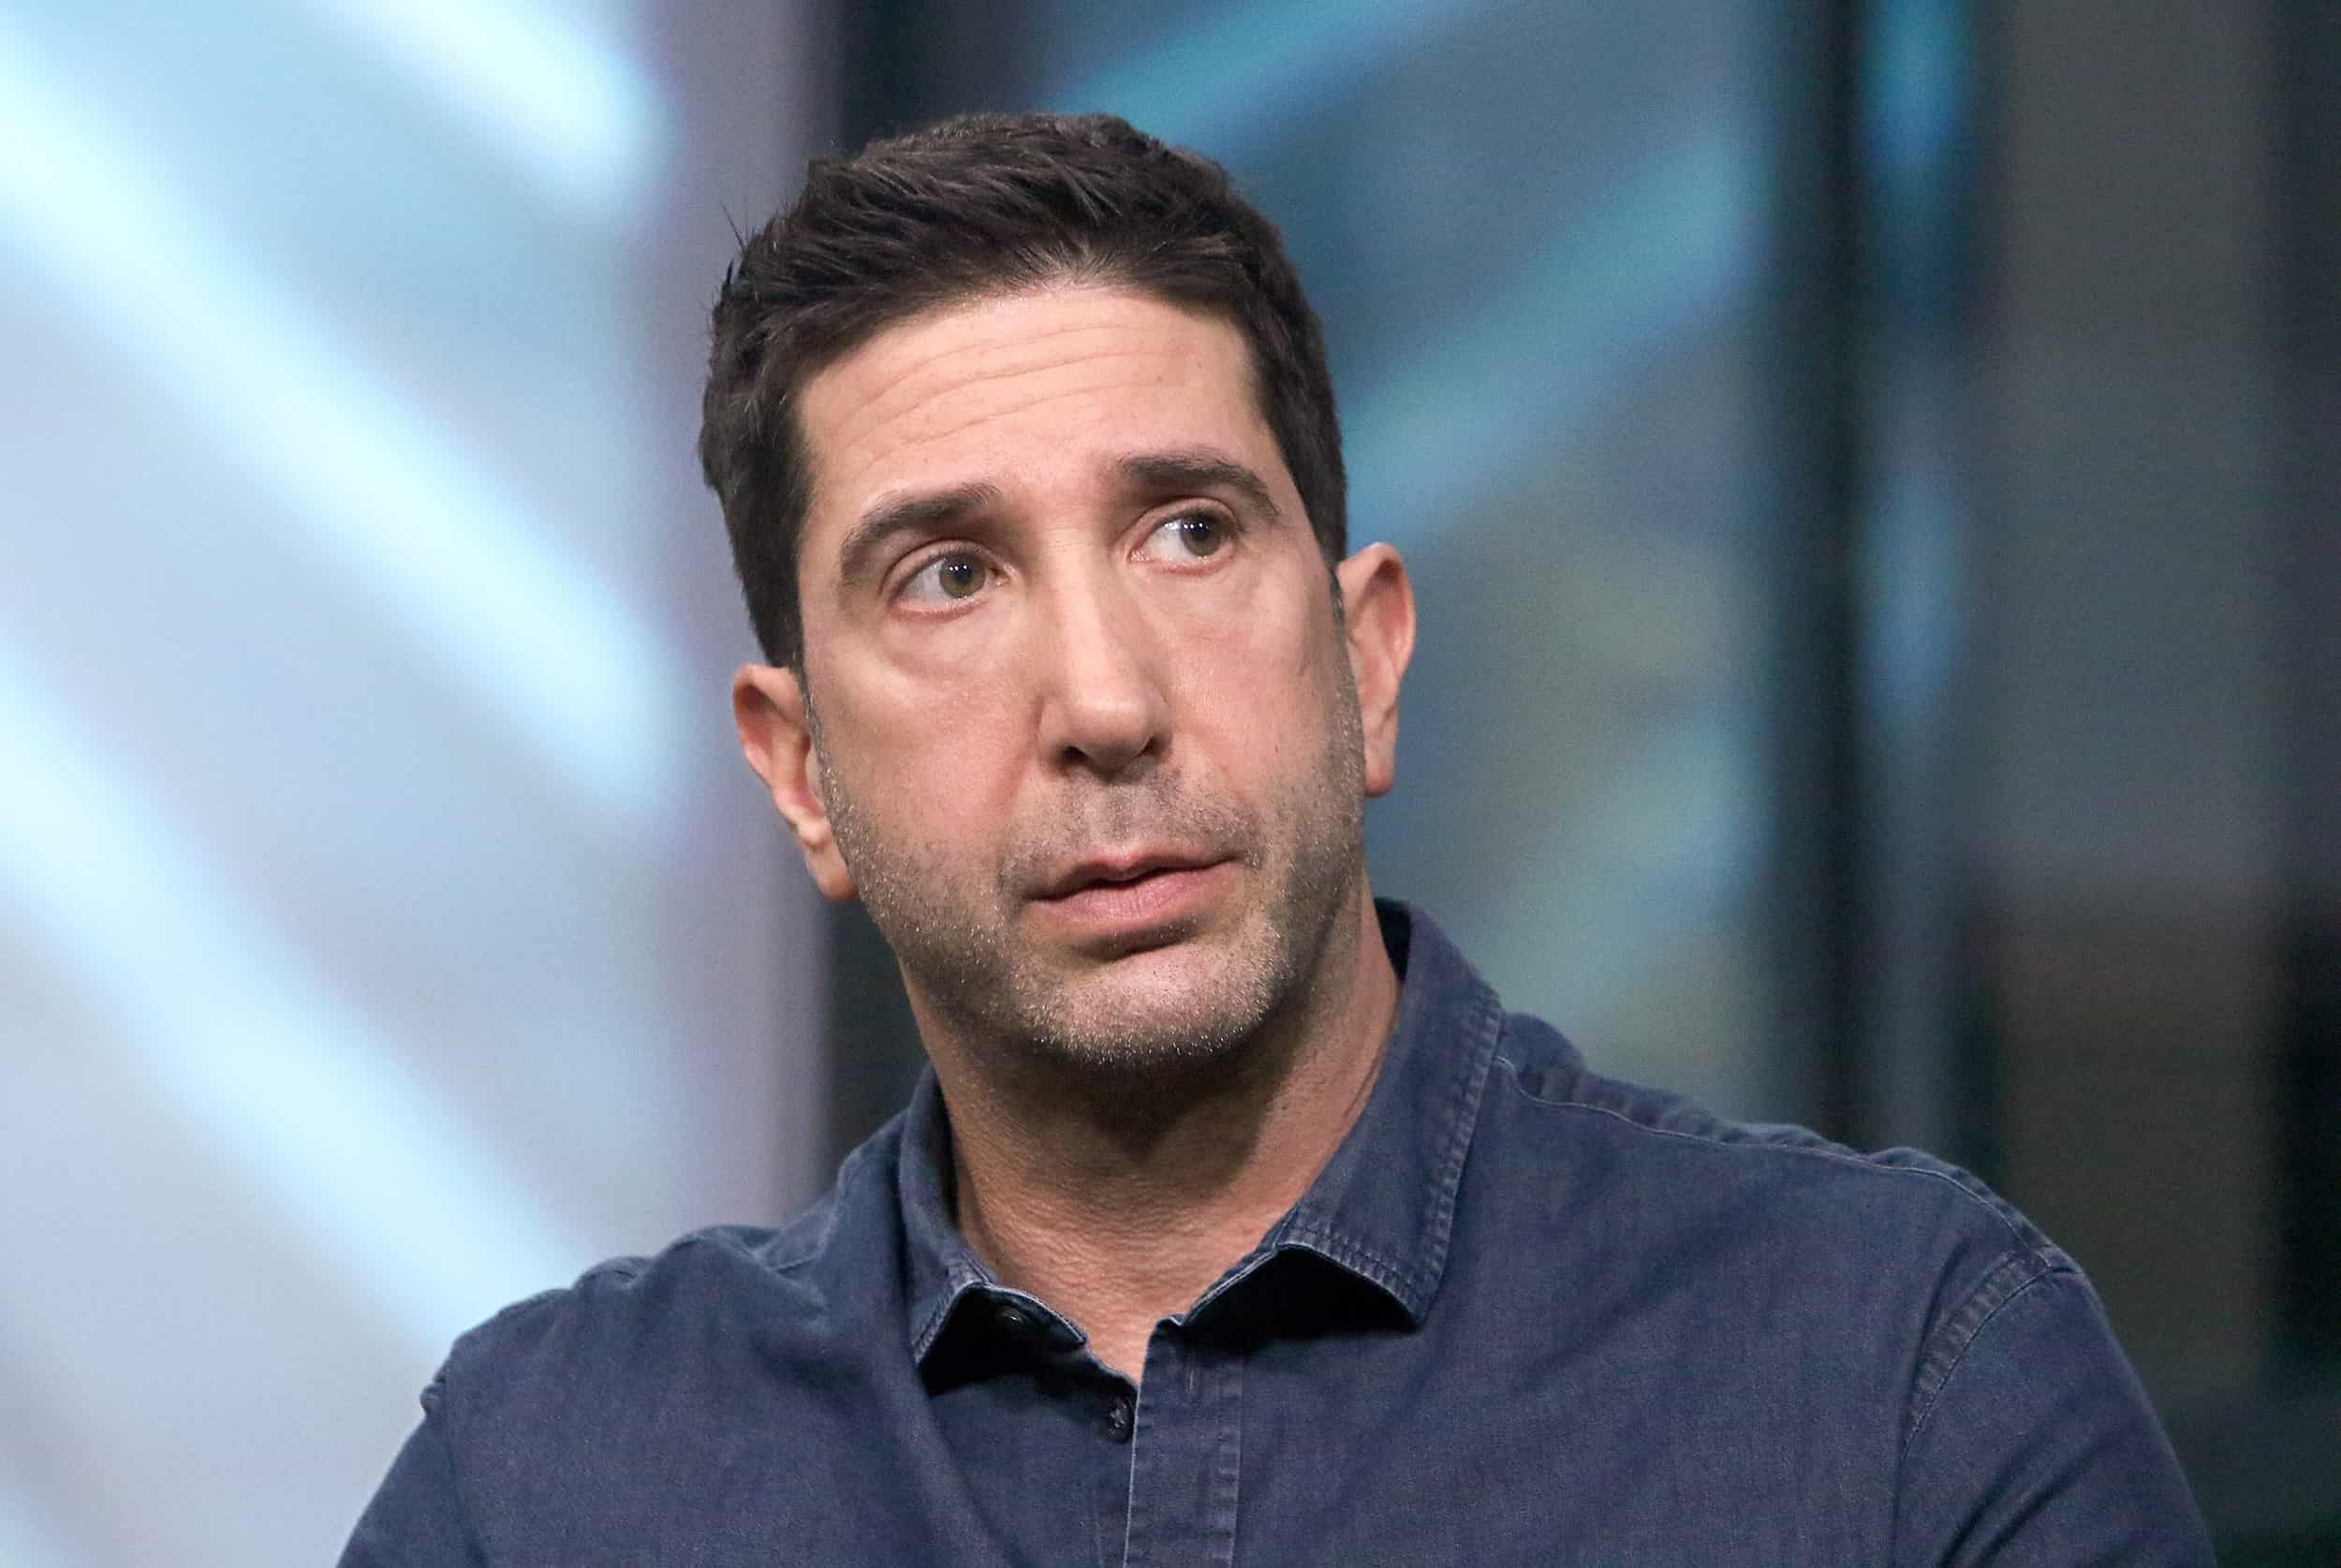 david schwimmer middle age photo in an interview